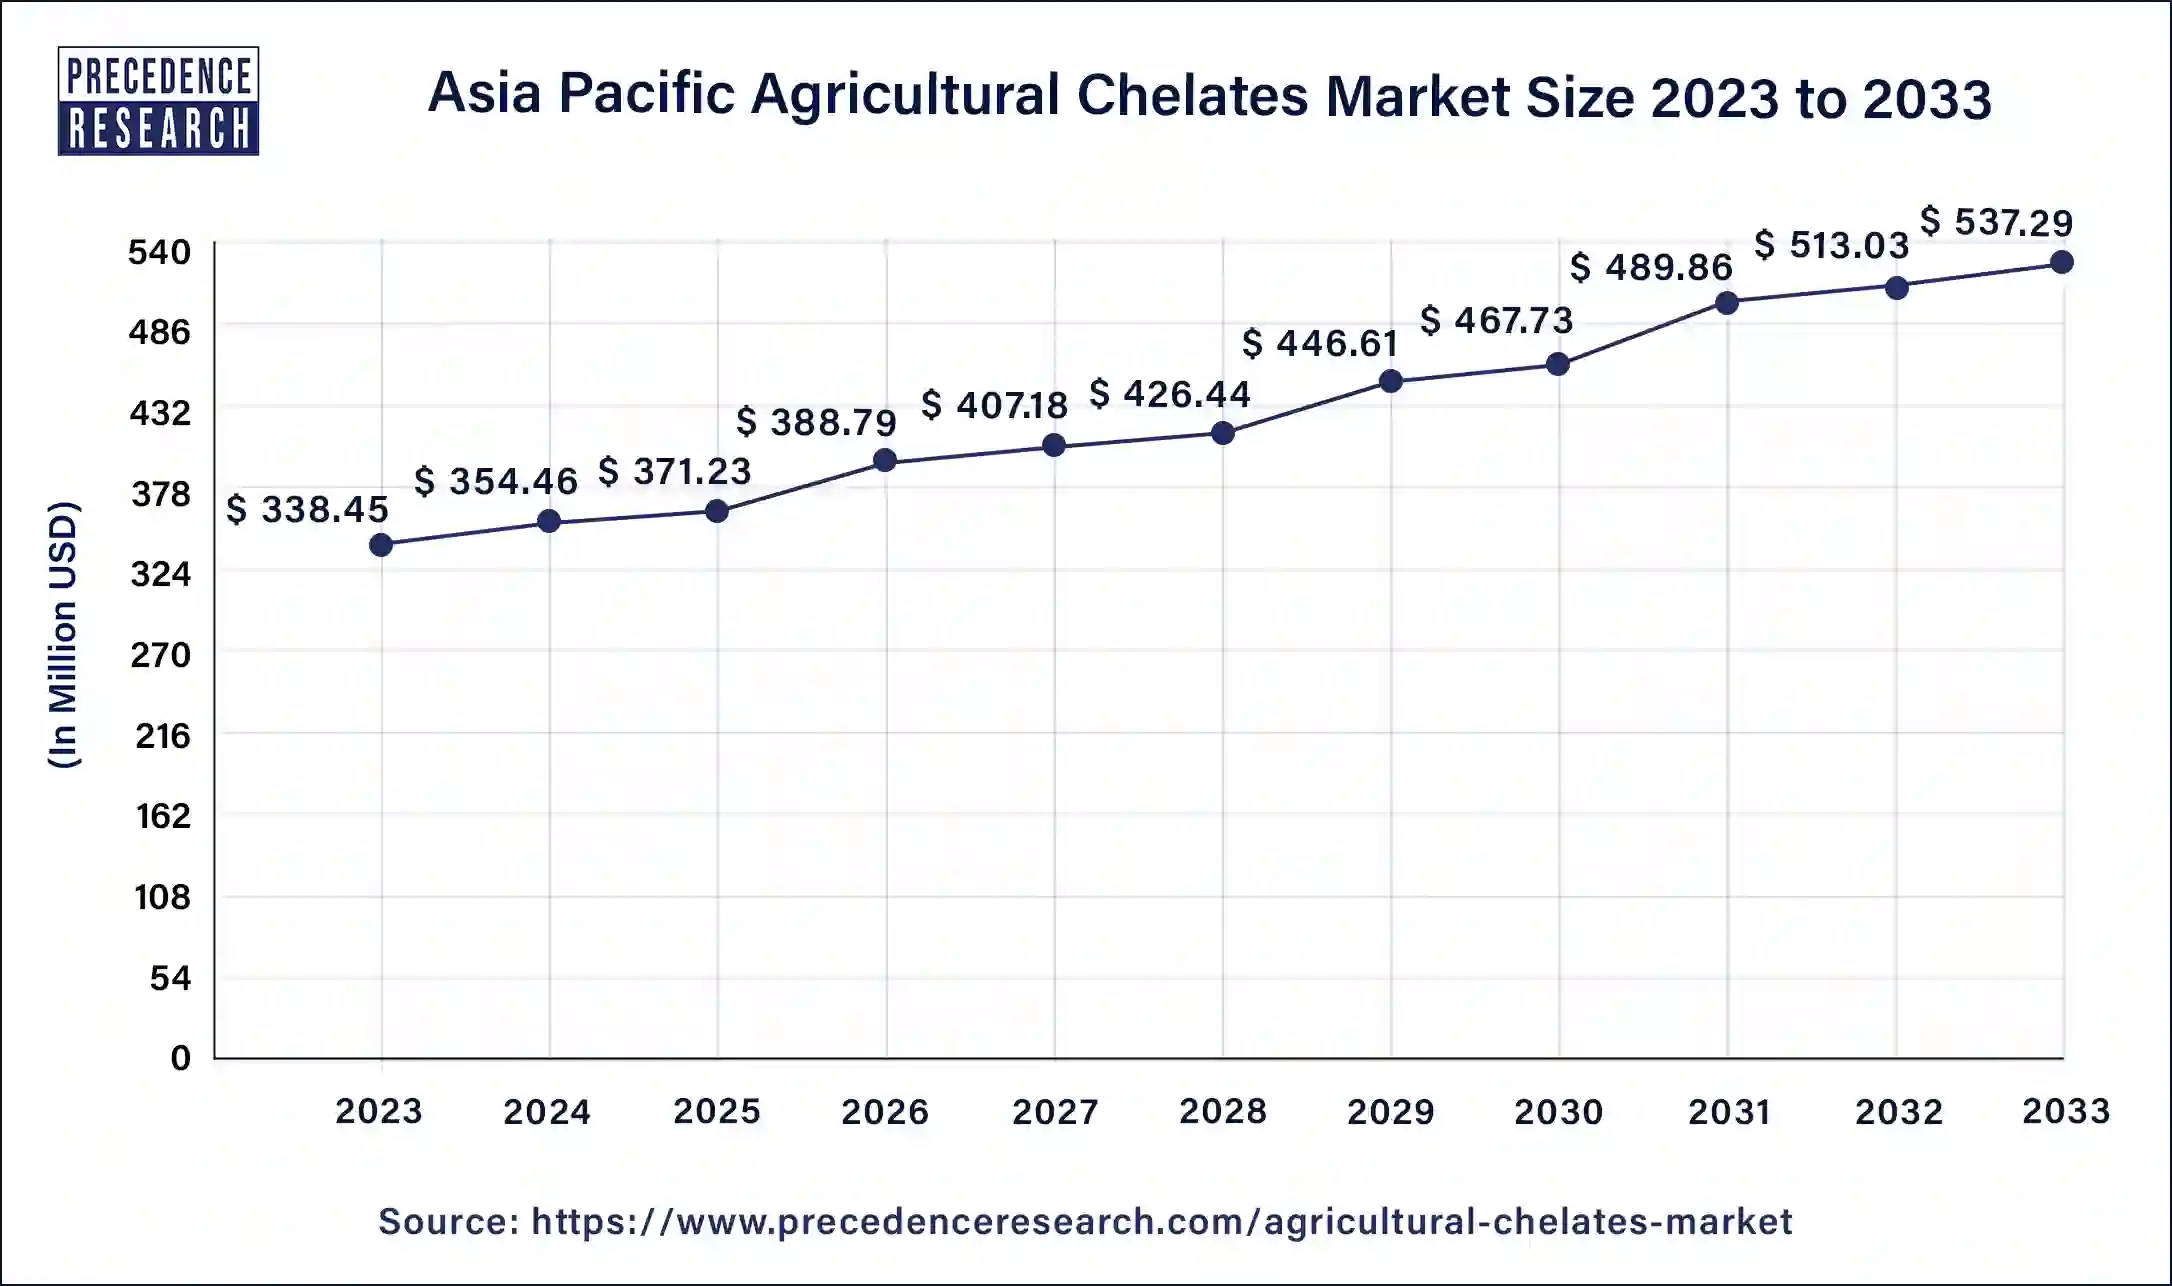 Asia Pacific Agricultural Chelates Market Size 2024 to 2033